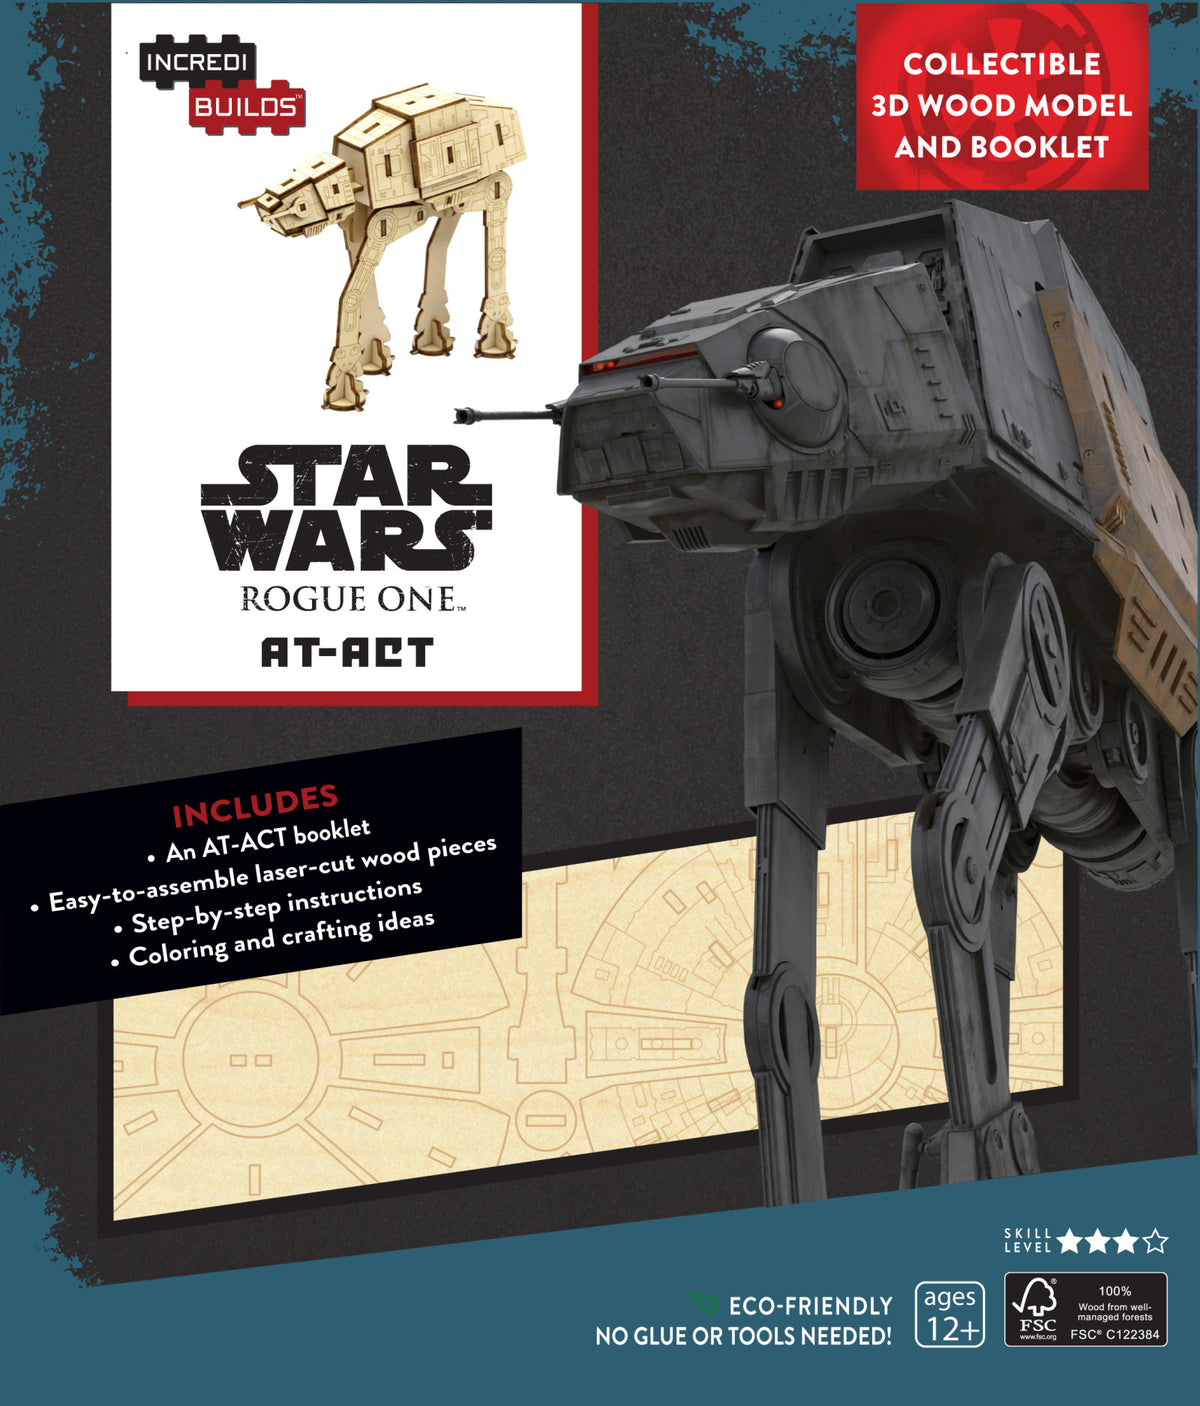 Incredibuilds Star Wars Rogue One At-Act 3D Wood Model